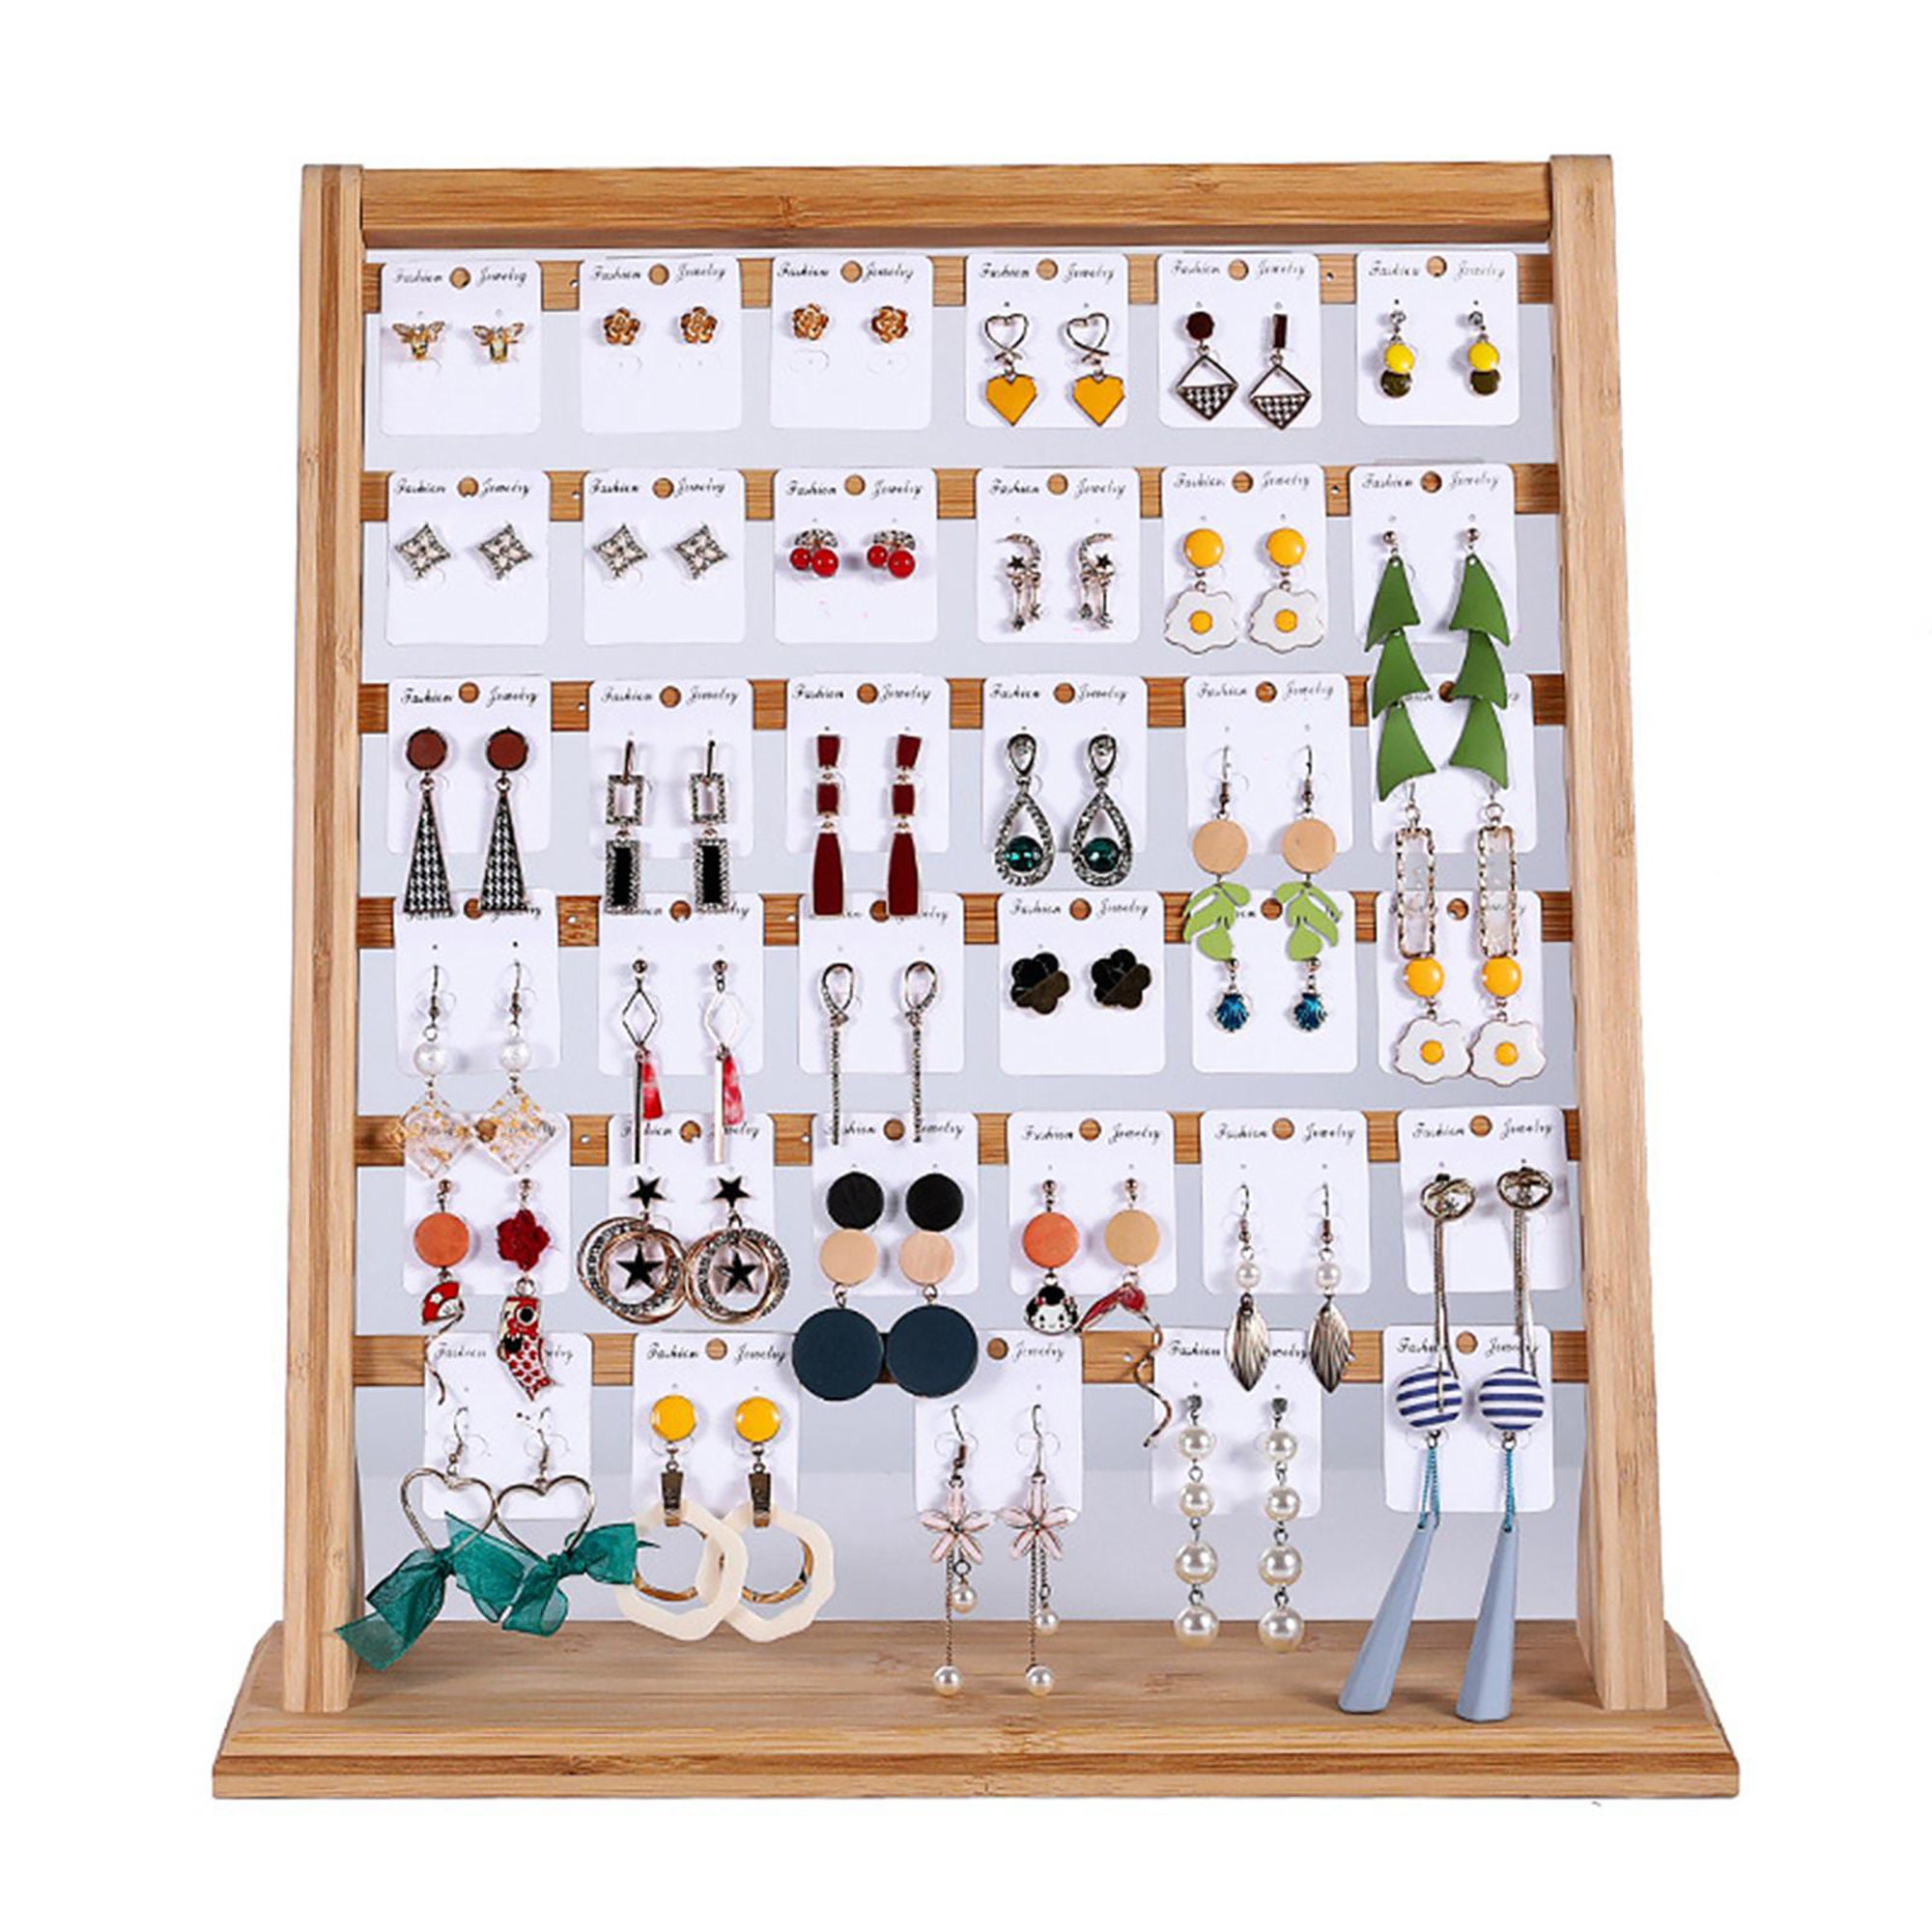 Ozzptuu Earring Display Stands for Selling Jewelry Display for Selling Earring Organizer 30 Hooks 5 Tier for Earring Cards, Bracelets, Keychains